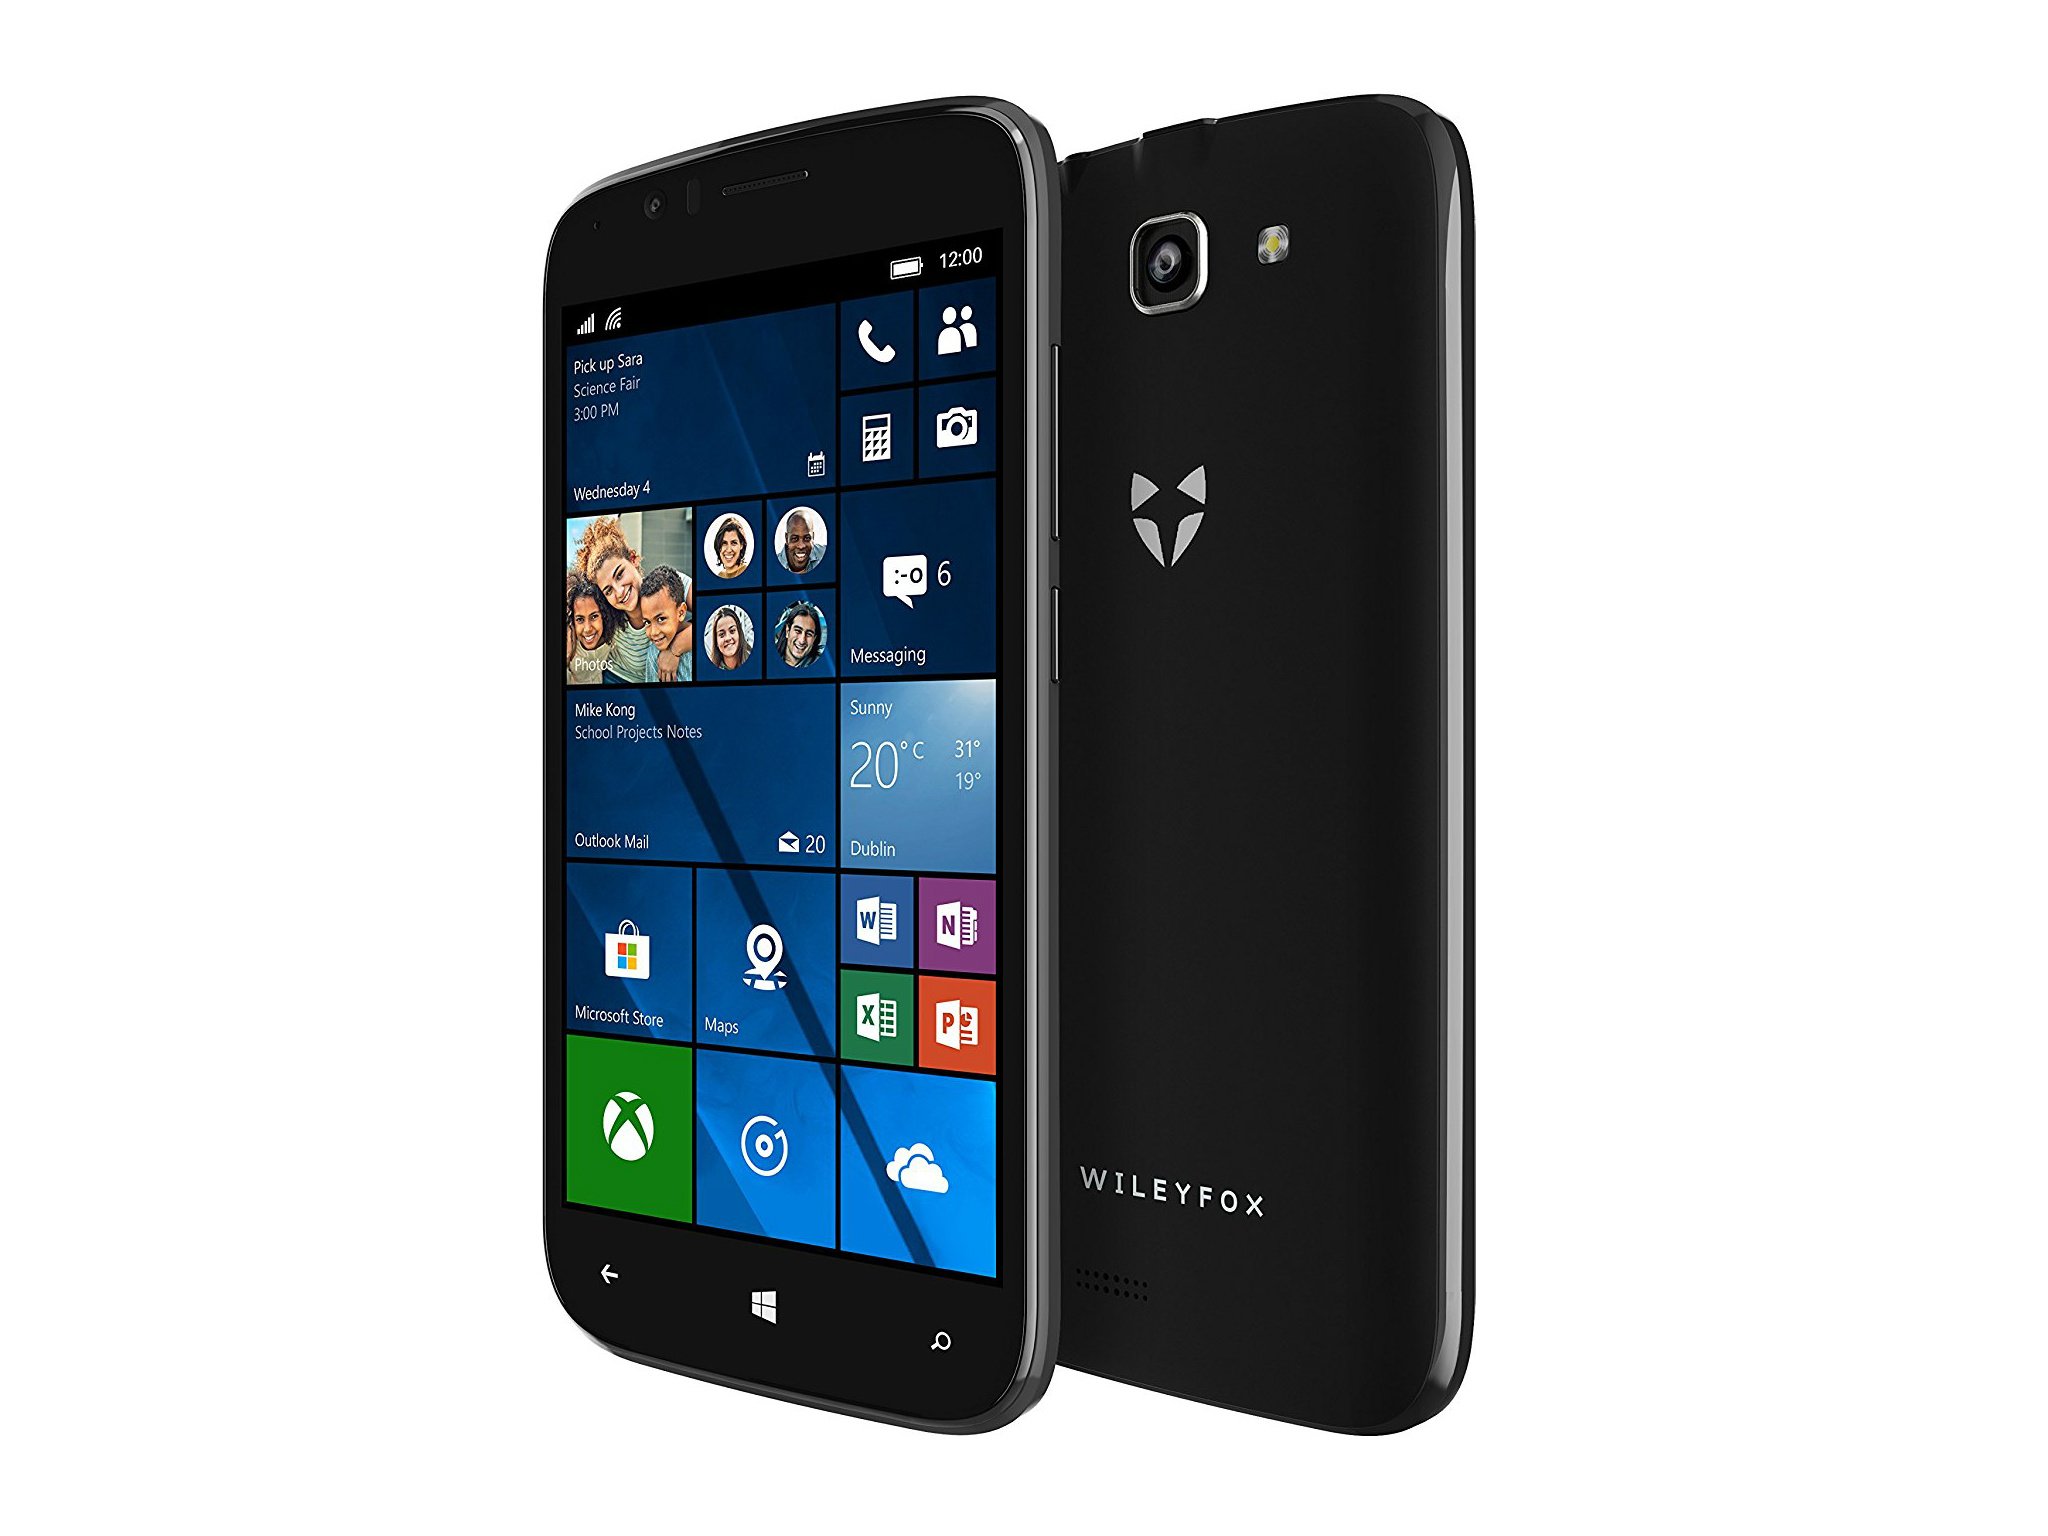 Wileyfox Pro with Windows 10 Mobile coming December 4